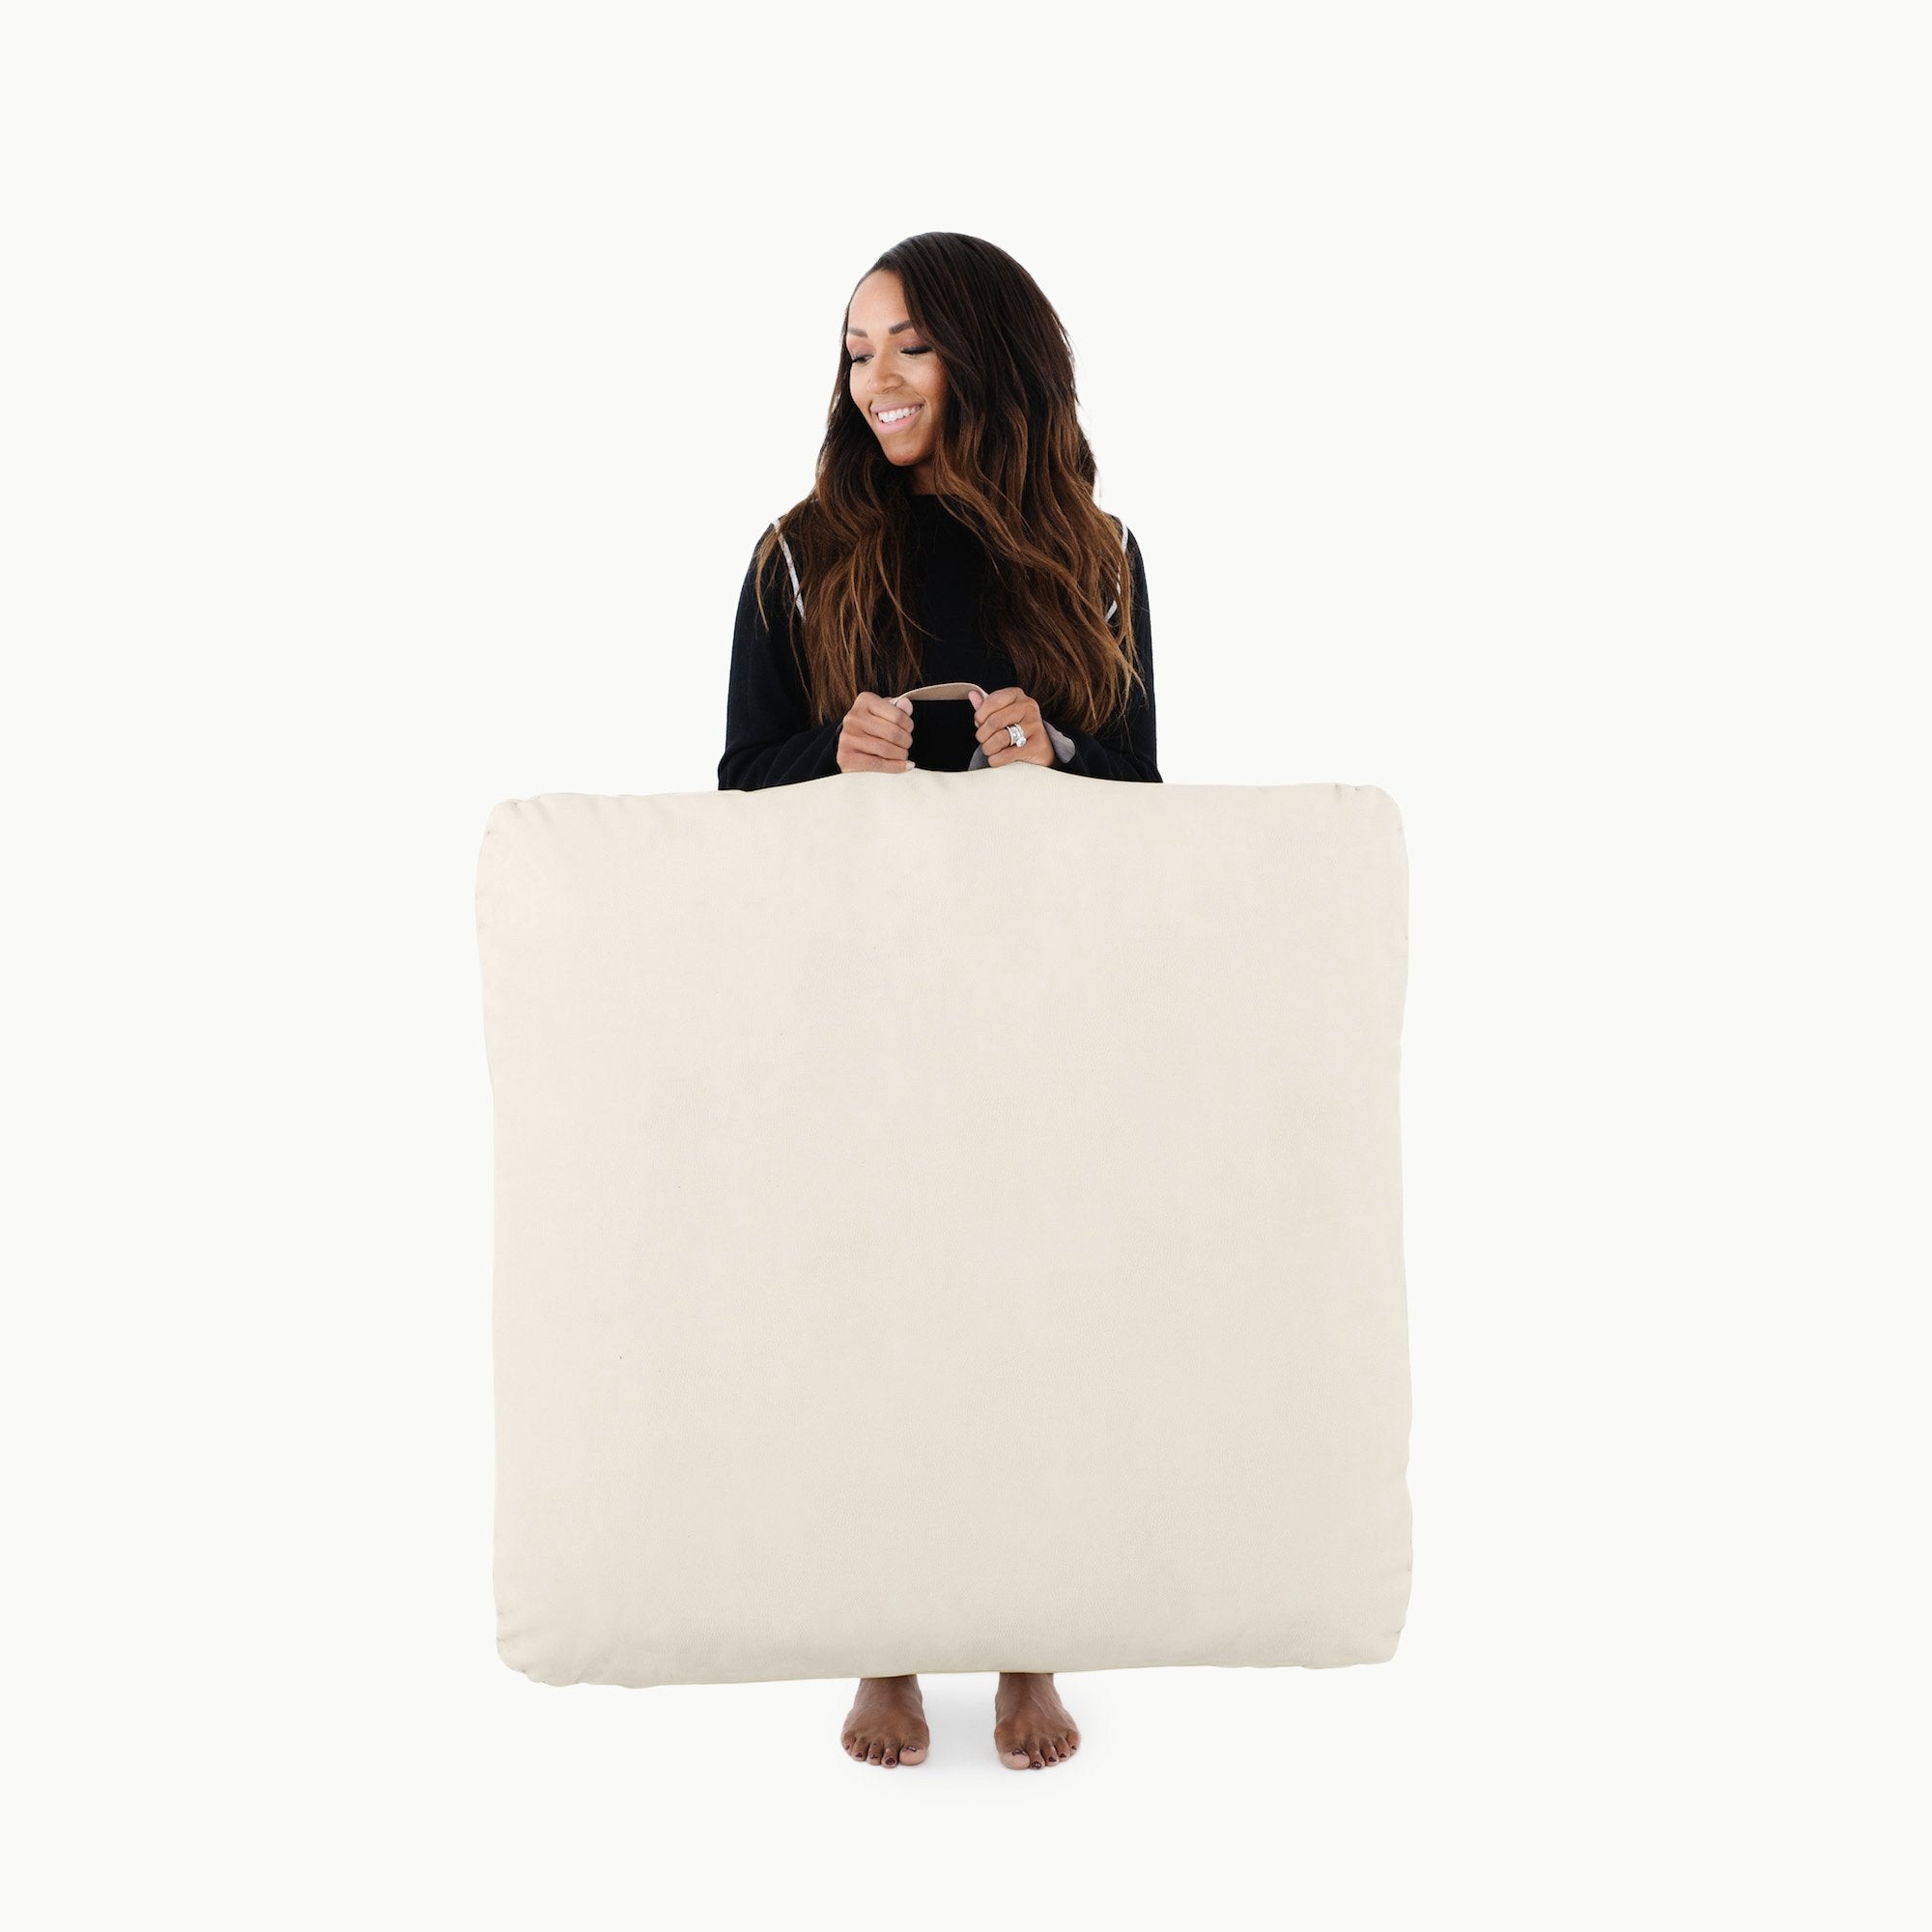 Ivory / Square@Woman holding the Ivory Square Floor Cushion